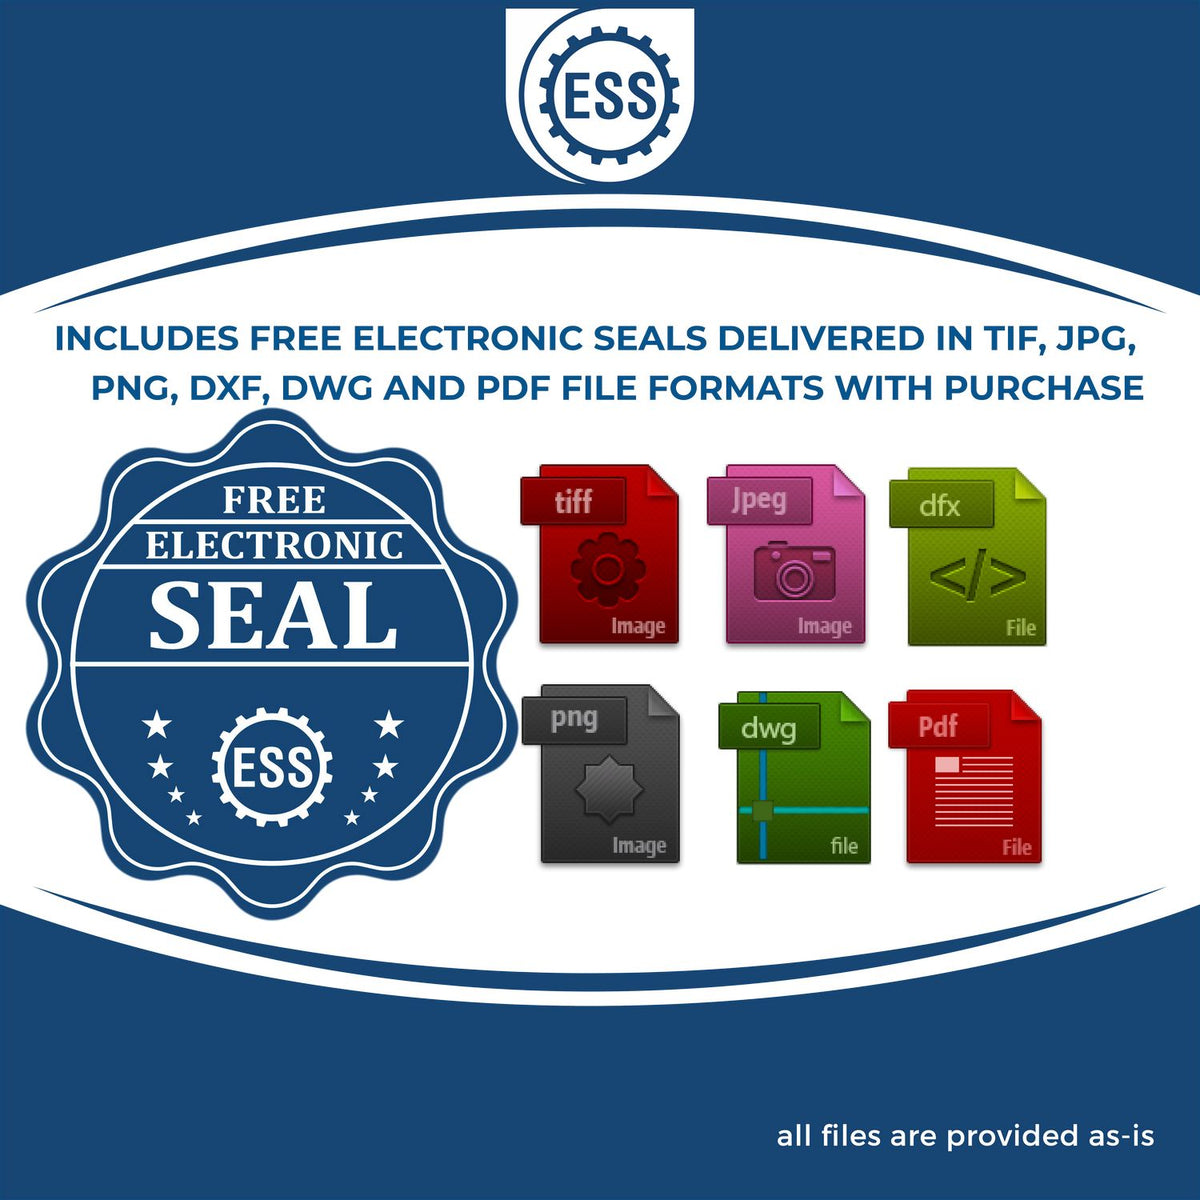 An infographic for the free electronic seal for the Hybrid Oregon Geologist Seal illustrating the different file type icons such as DXF, DWG, TIF, JPG and PNG.